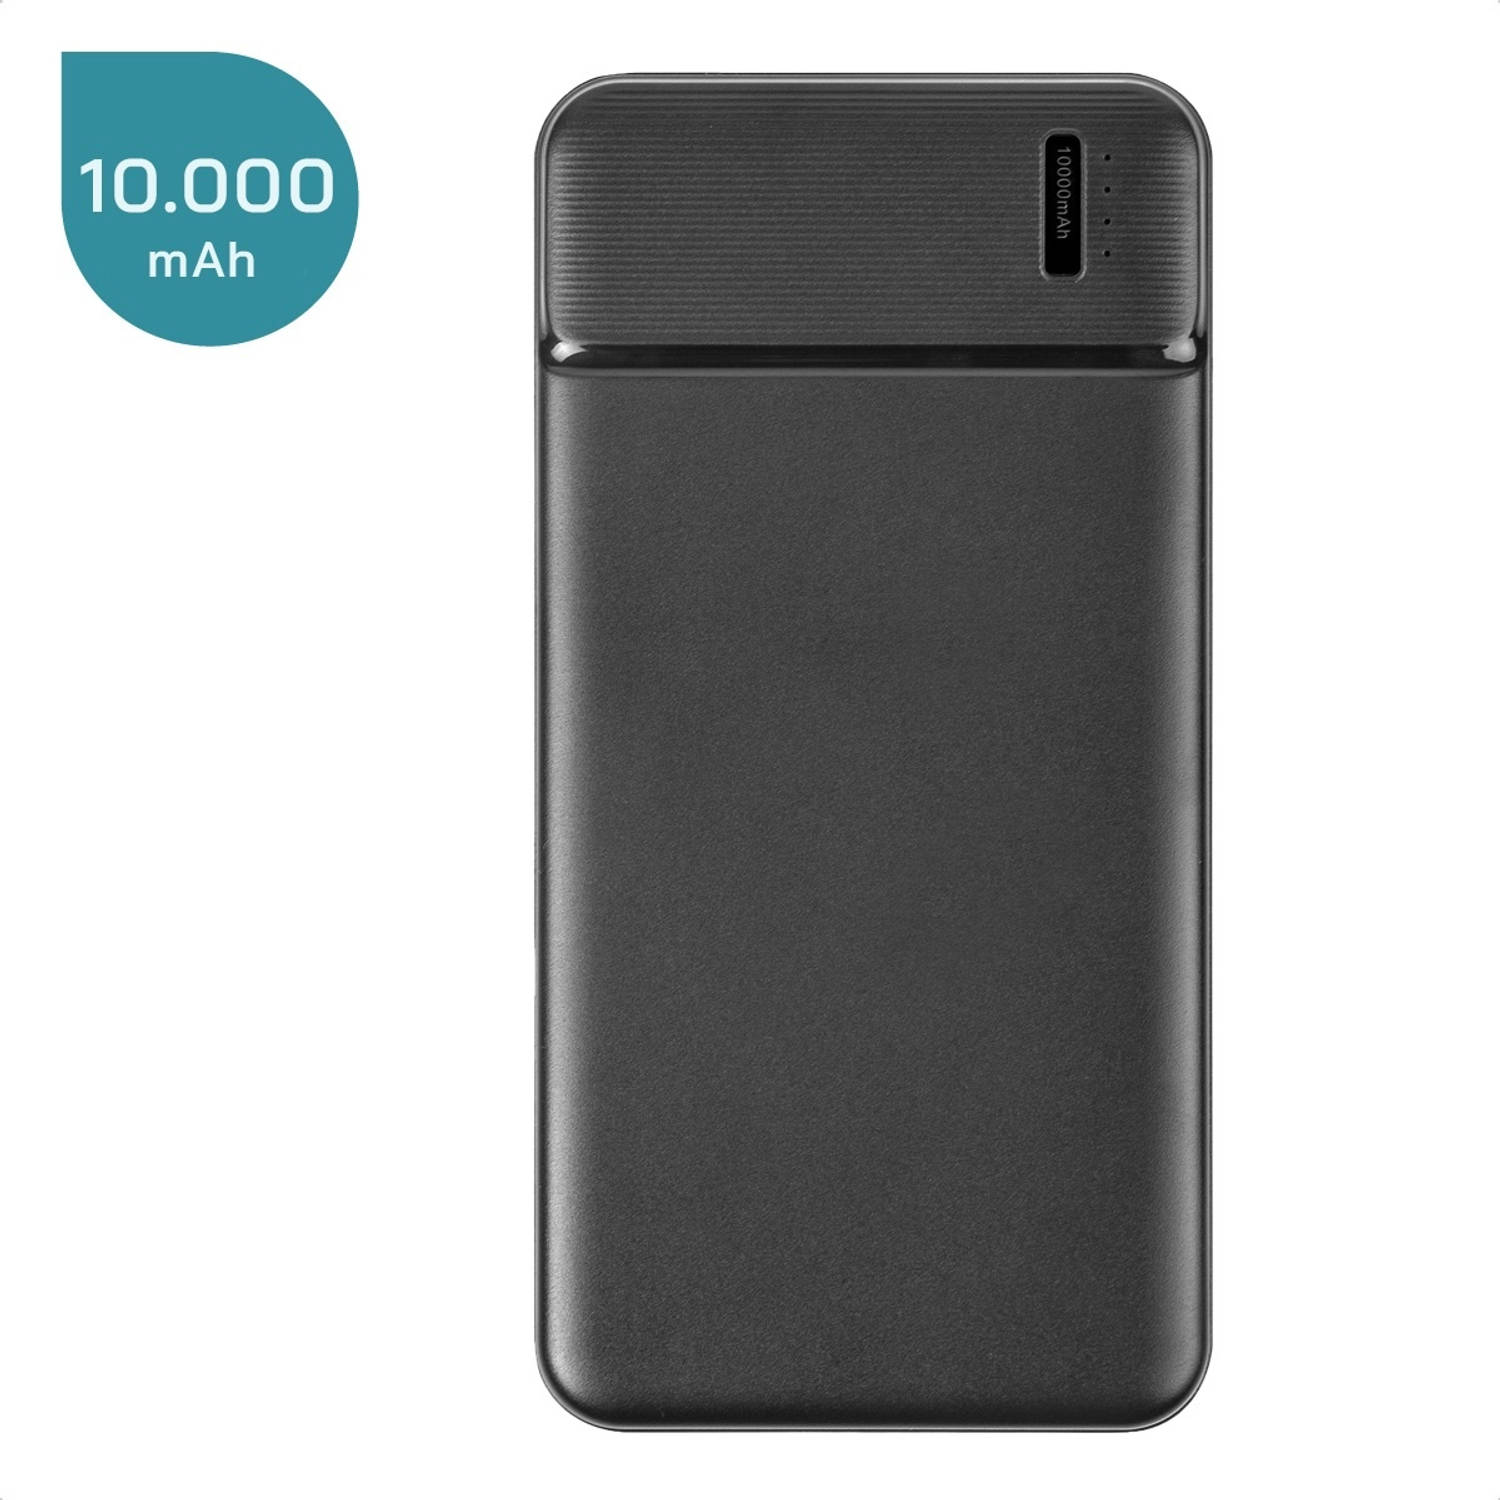 ForDig Oplaadbare Powerbank 10.000mAh - Snel laad functie / Quick charge - Incl. Kabel - 22.5W Snellader - Fast Charge 4 Poorten - 2 USB / USB-C / Micro USB - Compact Design Oplade